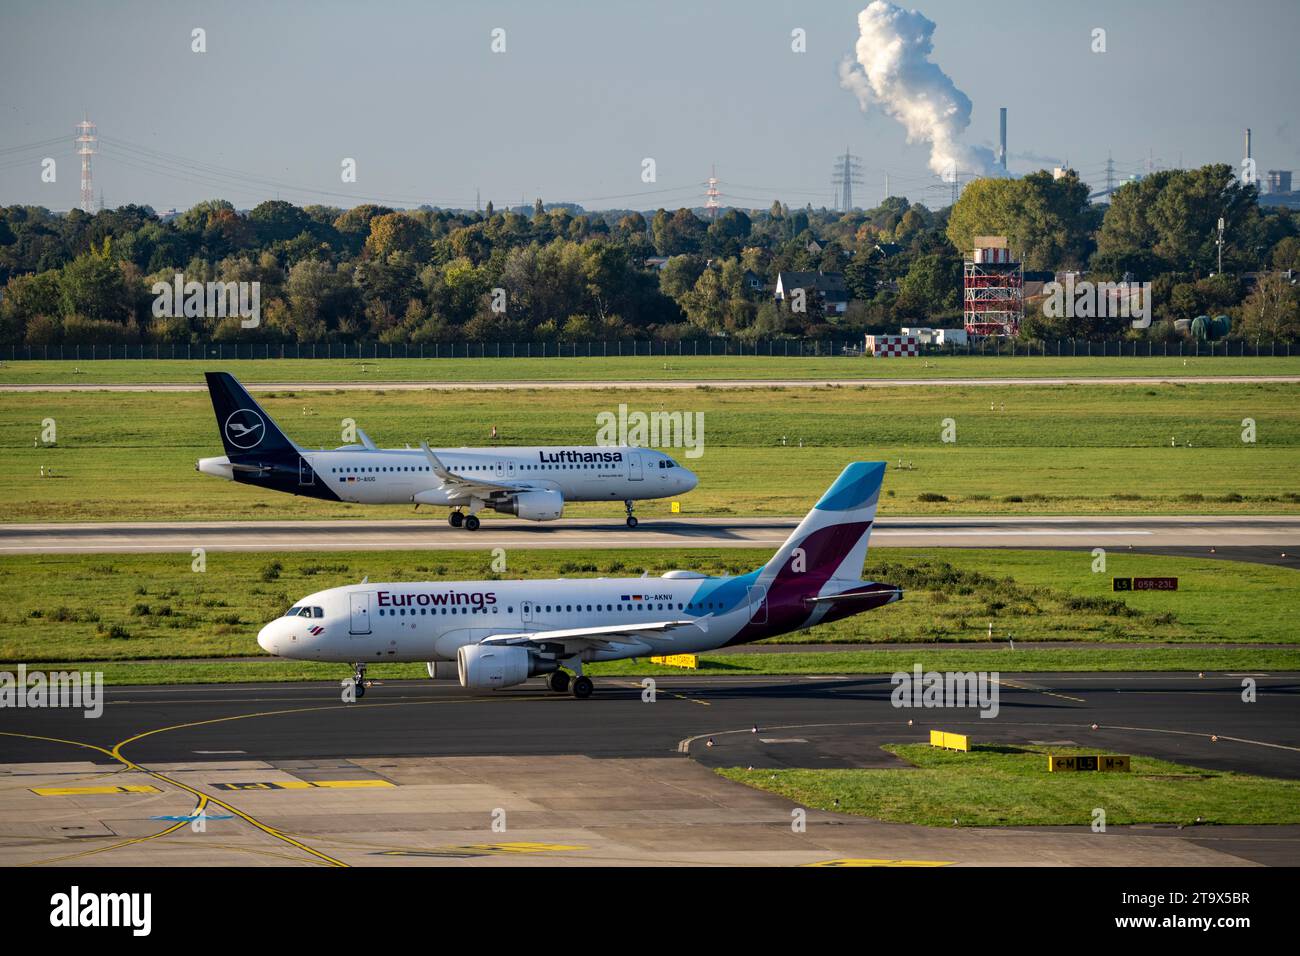 Düsseldorf Airport, Lufthansa Airbus A320-200 and Eurowings Airbus A319-100 on the taxiway, Stock Photo